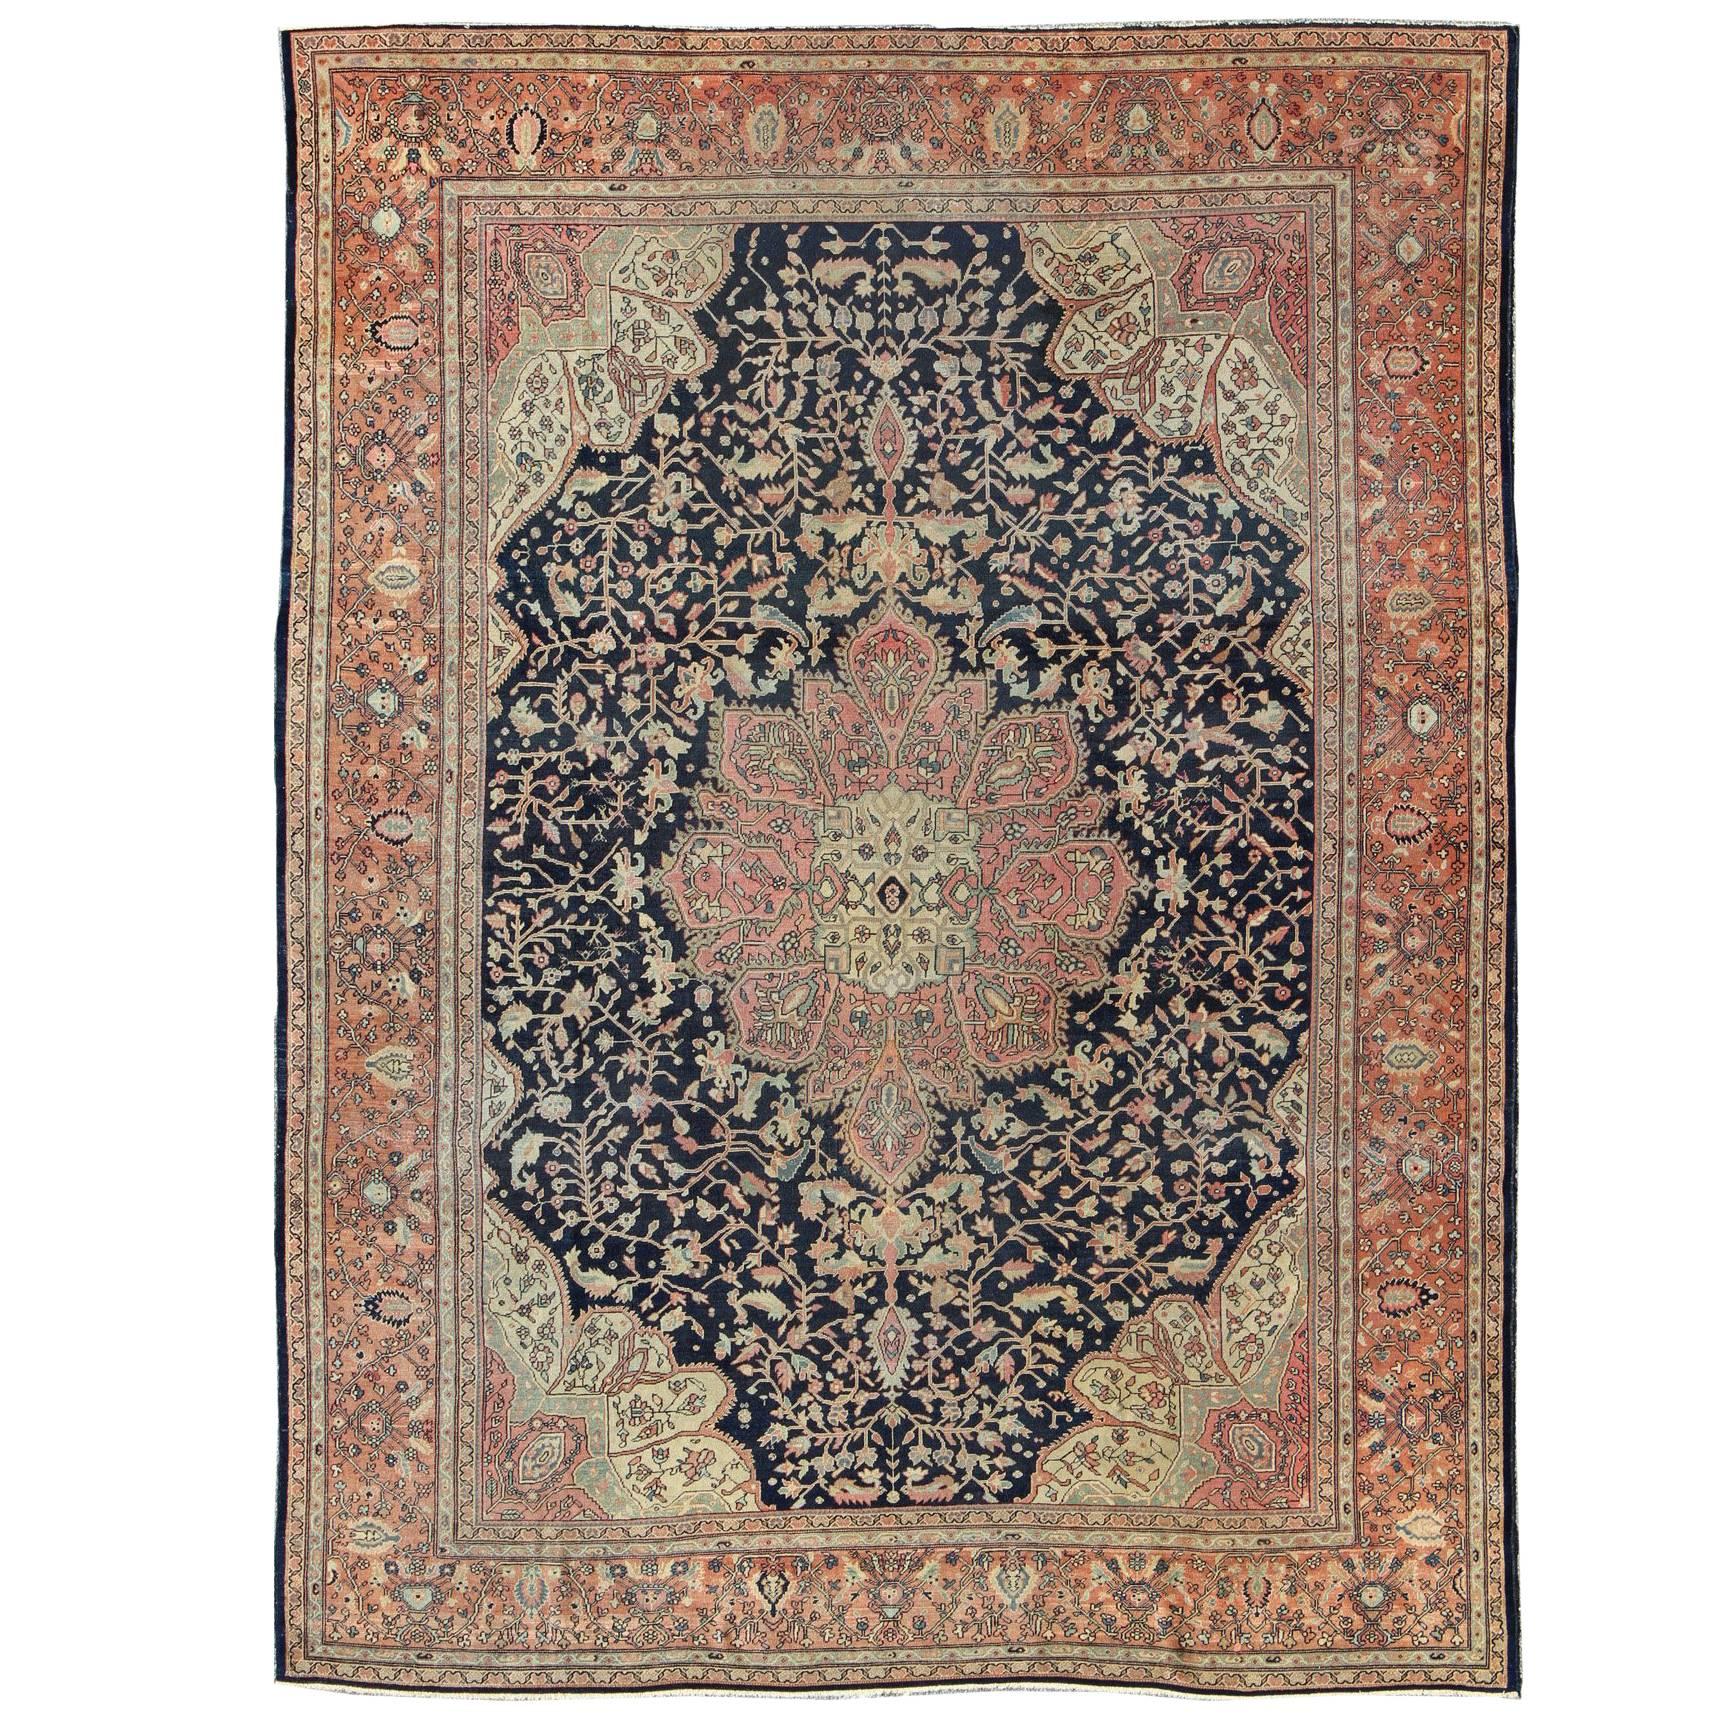 Antique Sarouk Farahan with Floral Motifs in Salmon, Green, Beige and Navy Blue